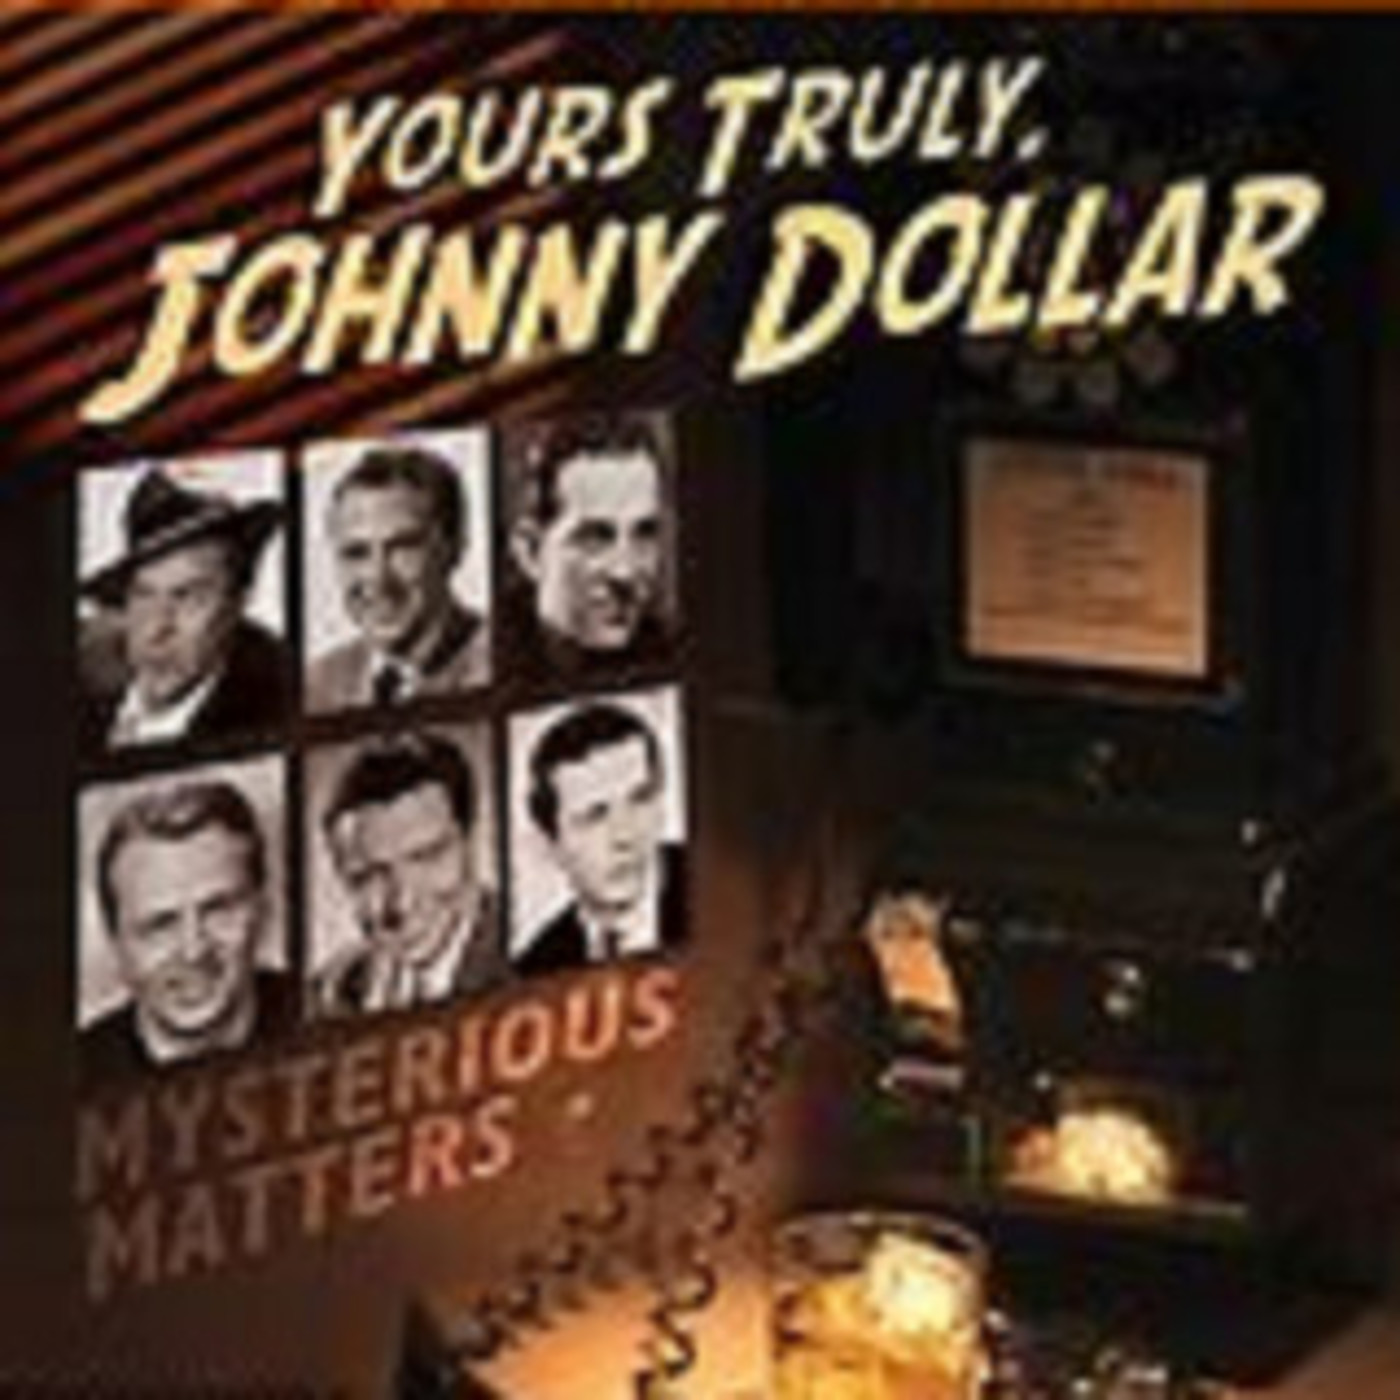 Yours Truly, Johnny Dollar - 051362, episode 791 - The Lust for Gold Matter